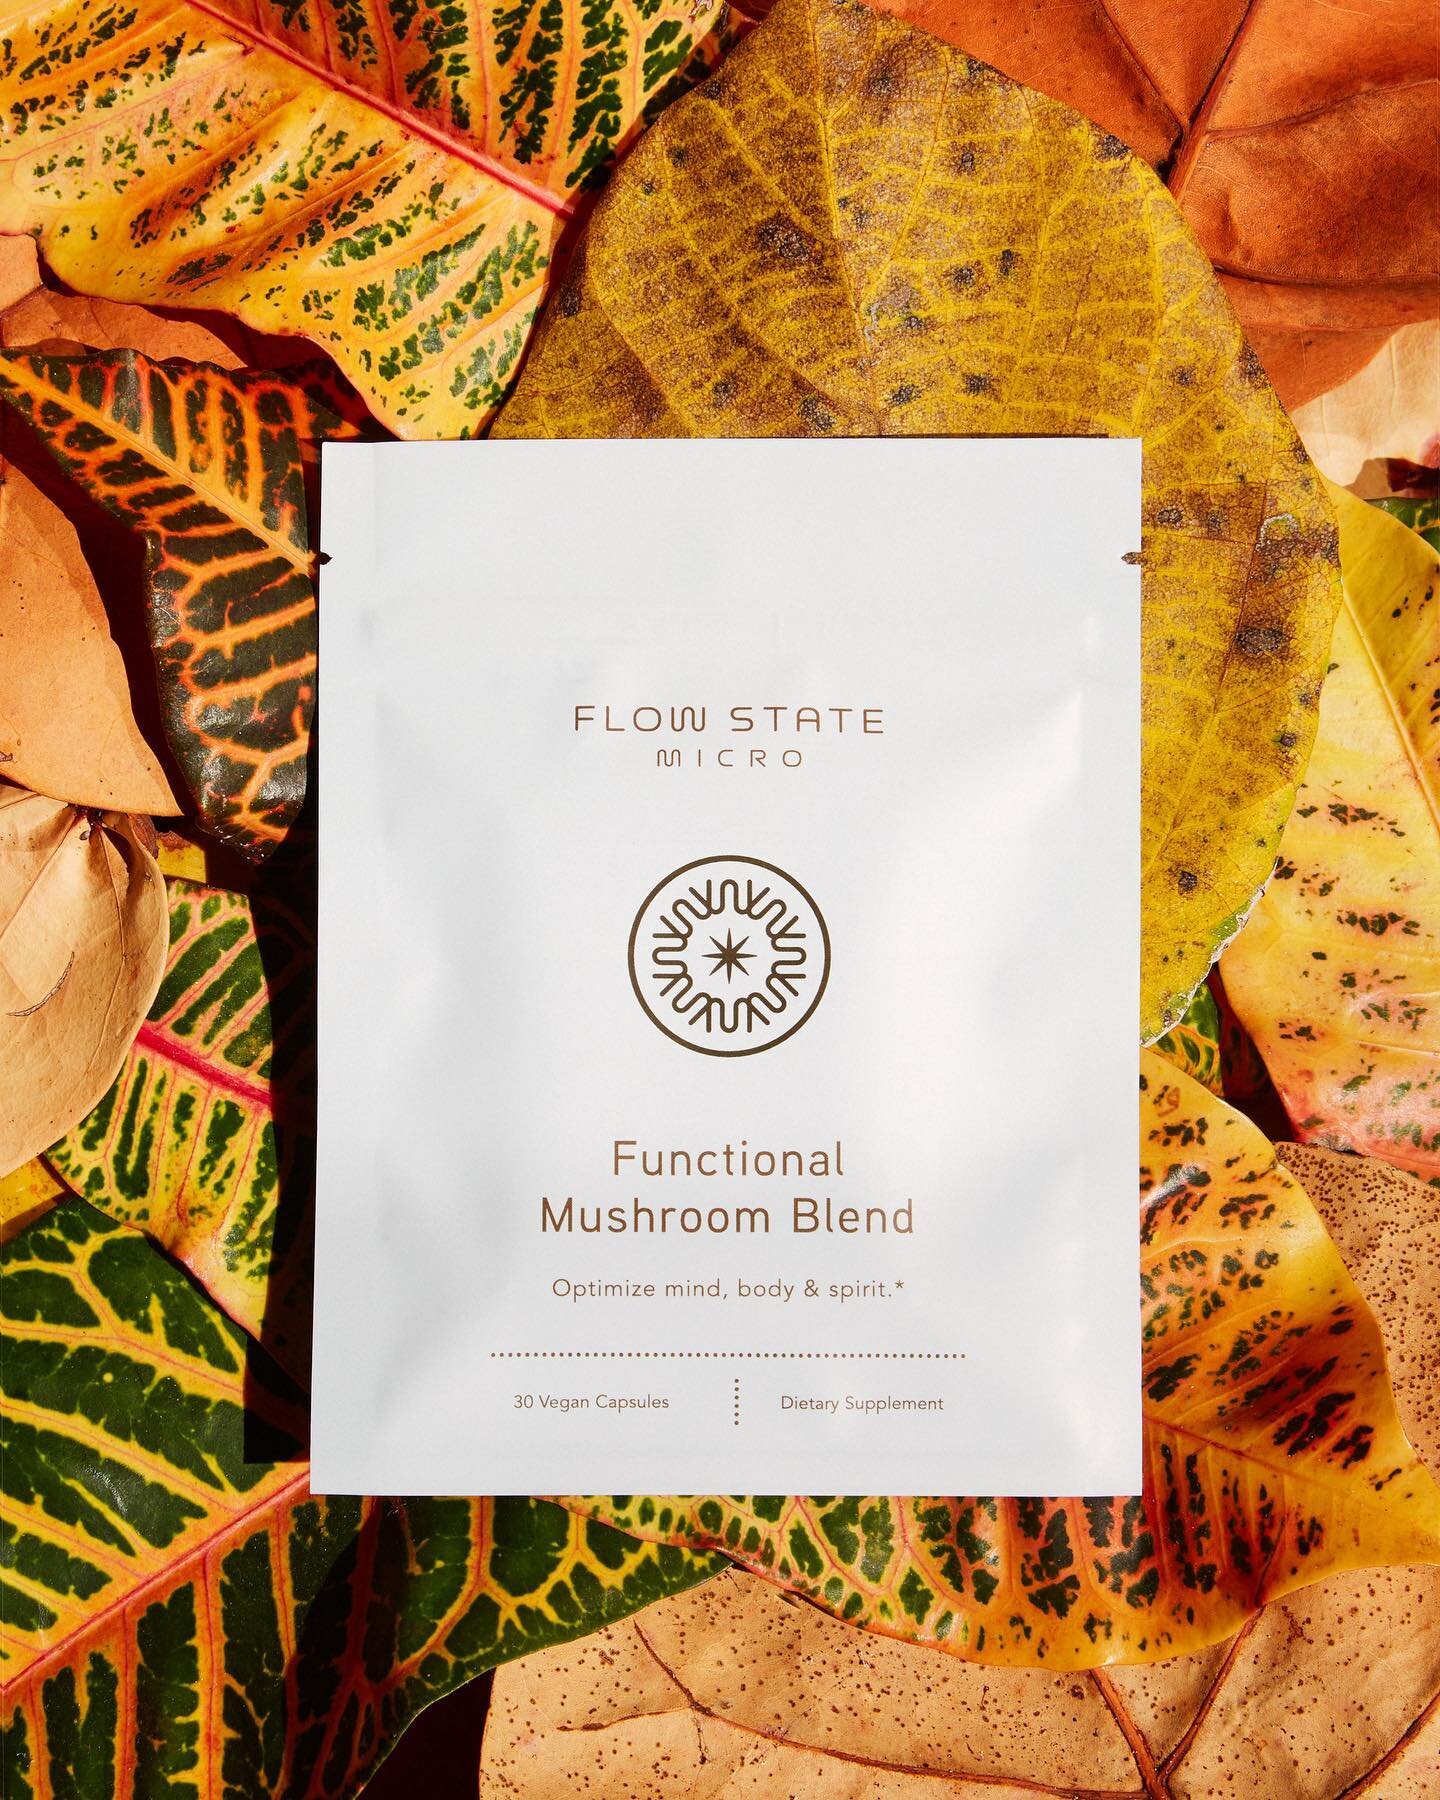 Flow State Micro&rsquo;s Functional Mushroom blend combines Lion&rsquo;s Mane, Chaga, Cordyceps and Maitake mushrooms;
the four most important mushrooms for brain, focus, increased energy and immunity support!

Order today www.FlowStateMicro.com
Ship